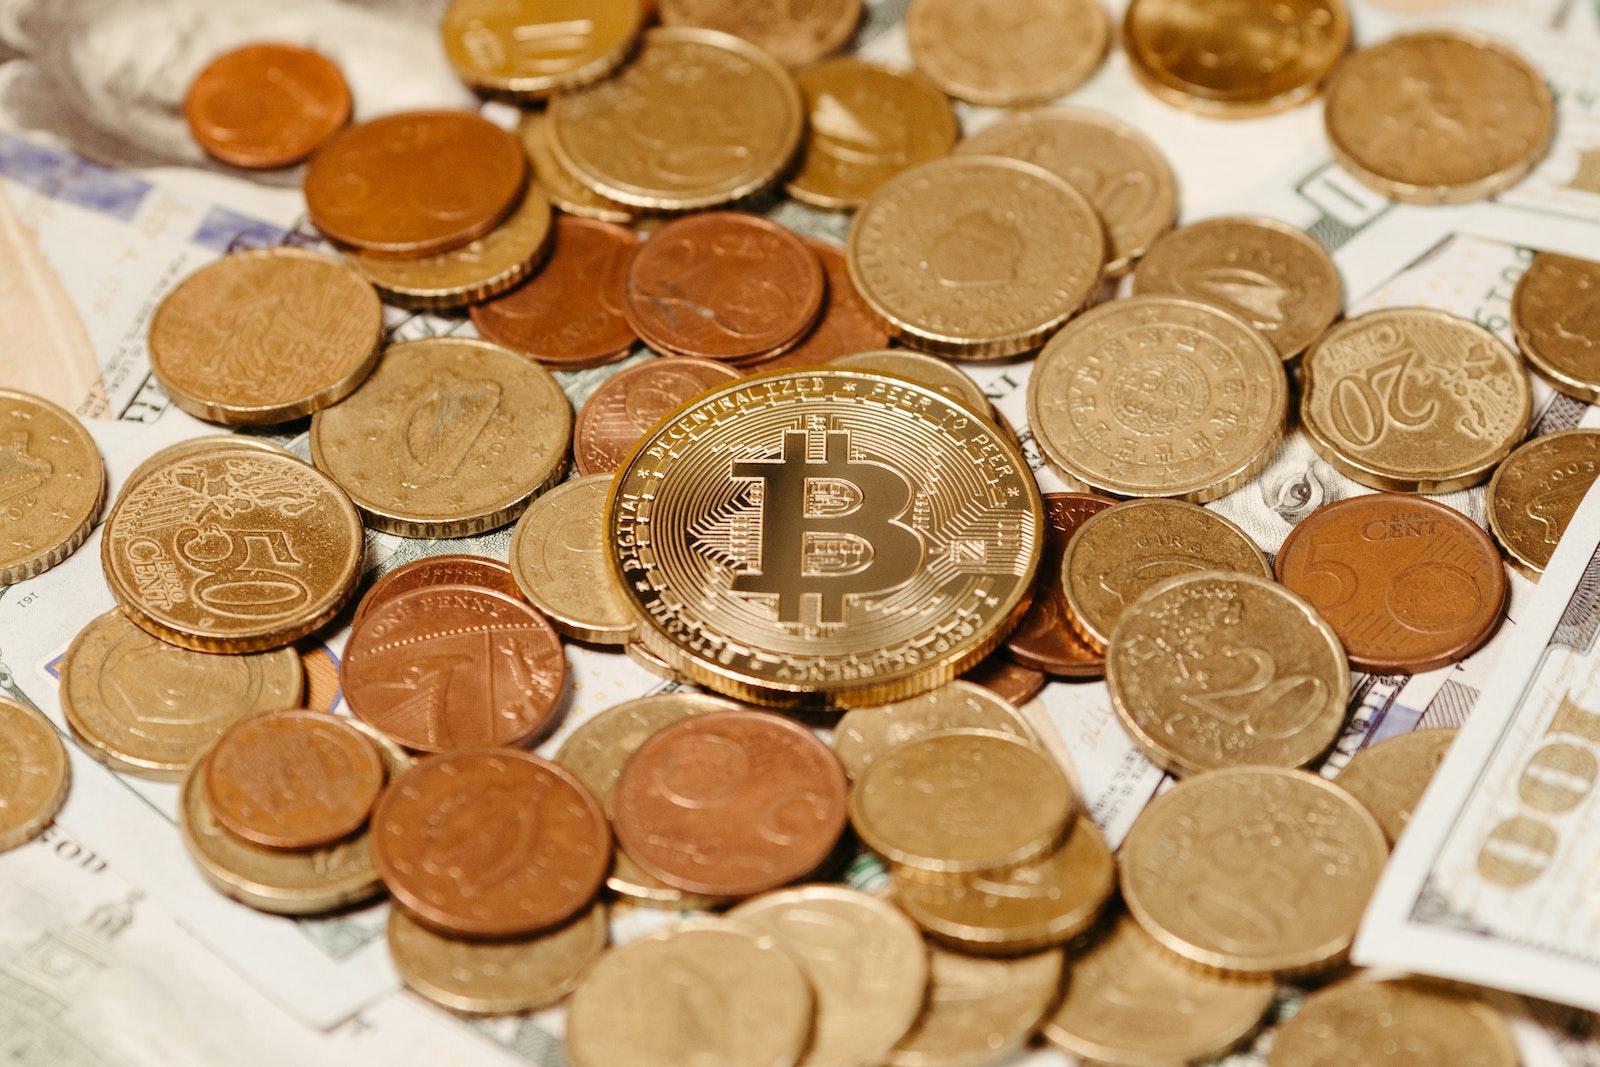 Bitcoin on Pile of Golden Coins